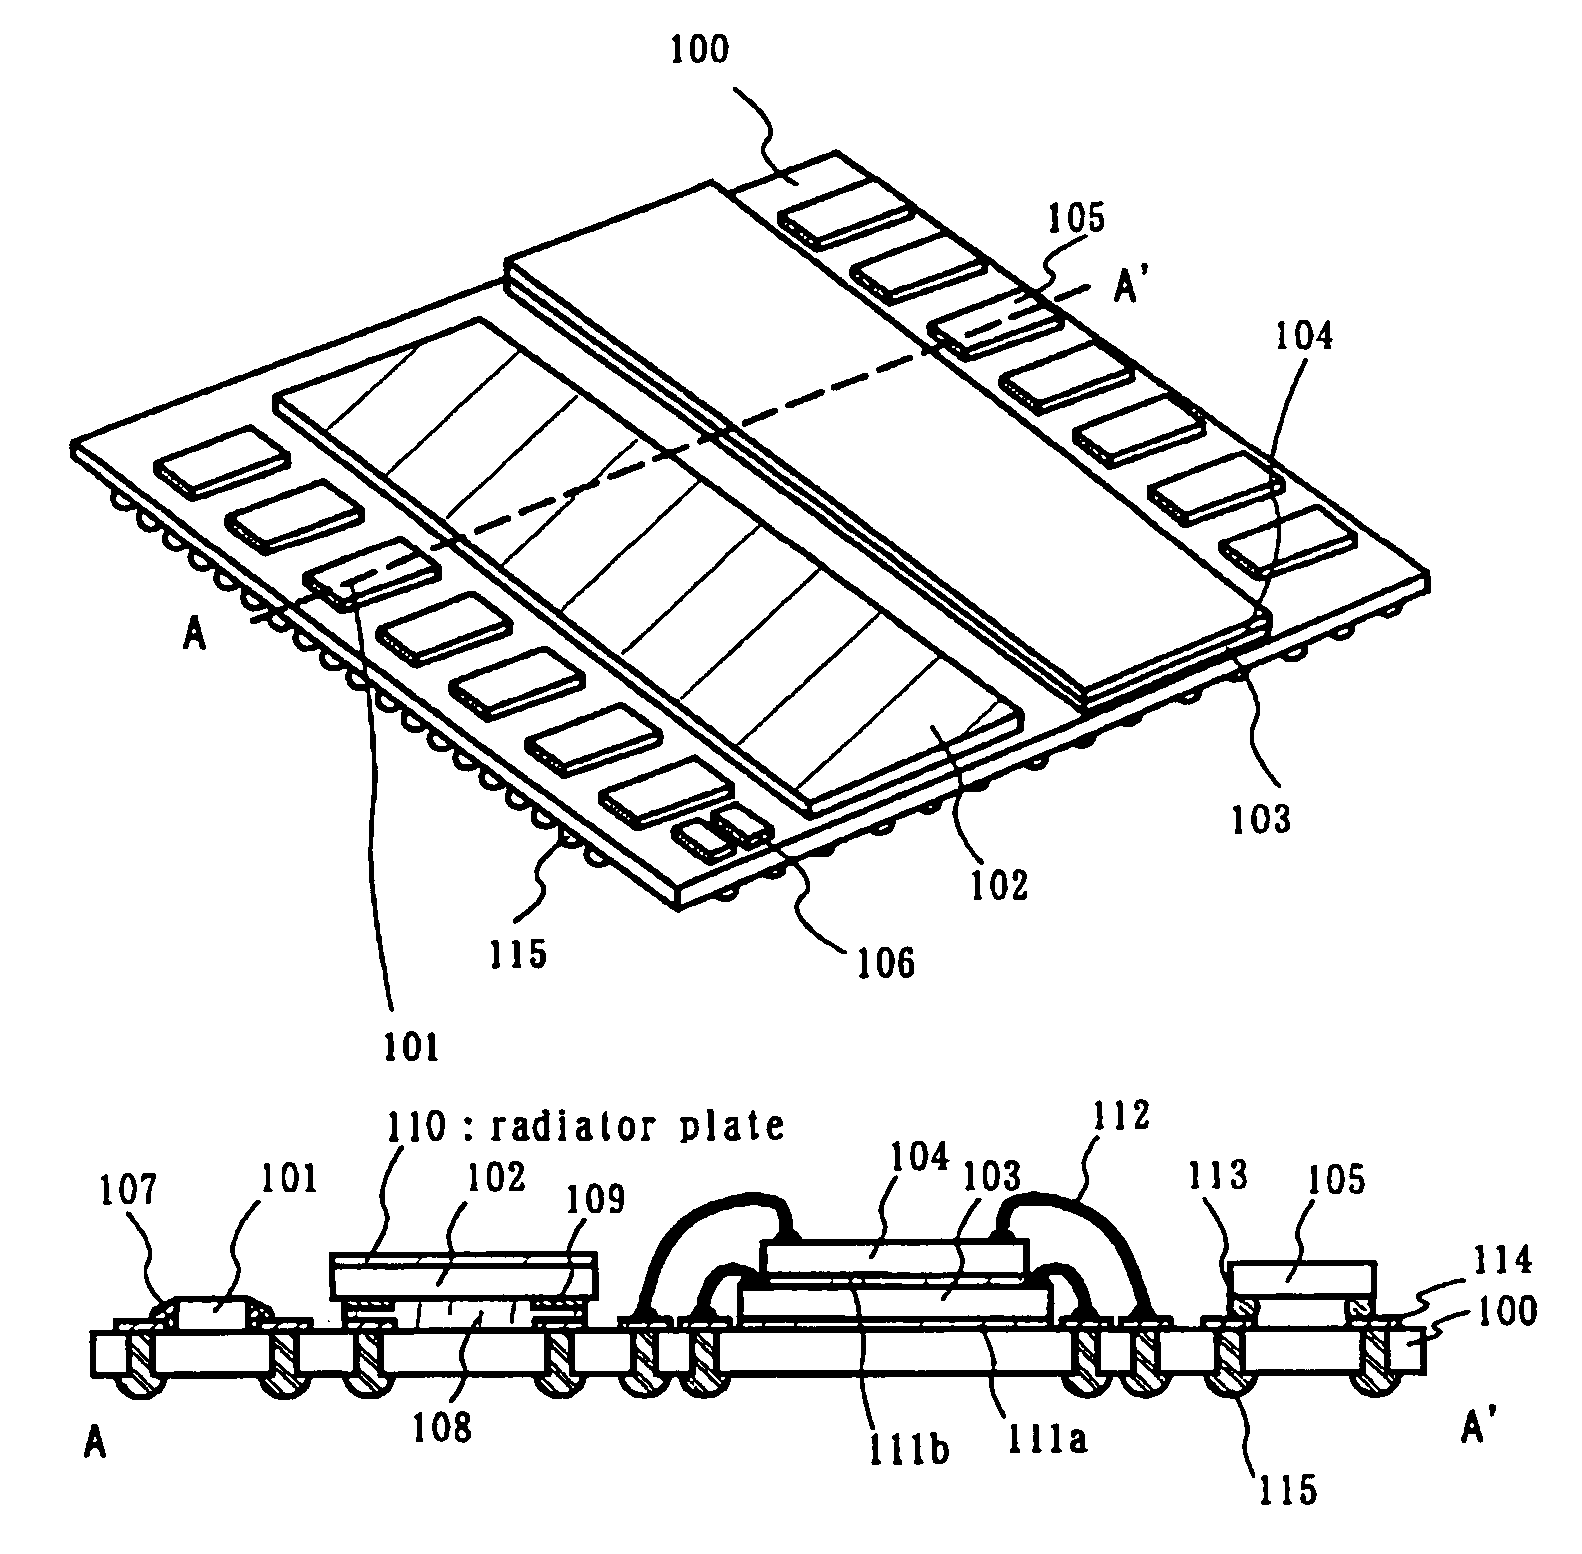 Semiconductor device having transferred integrated circuit